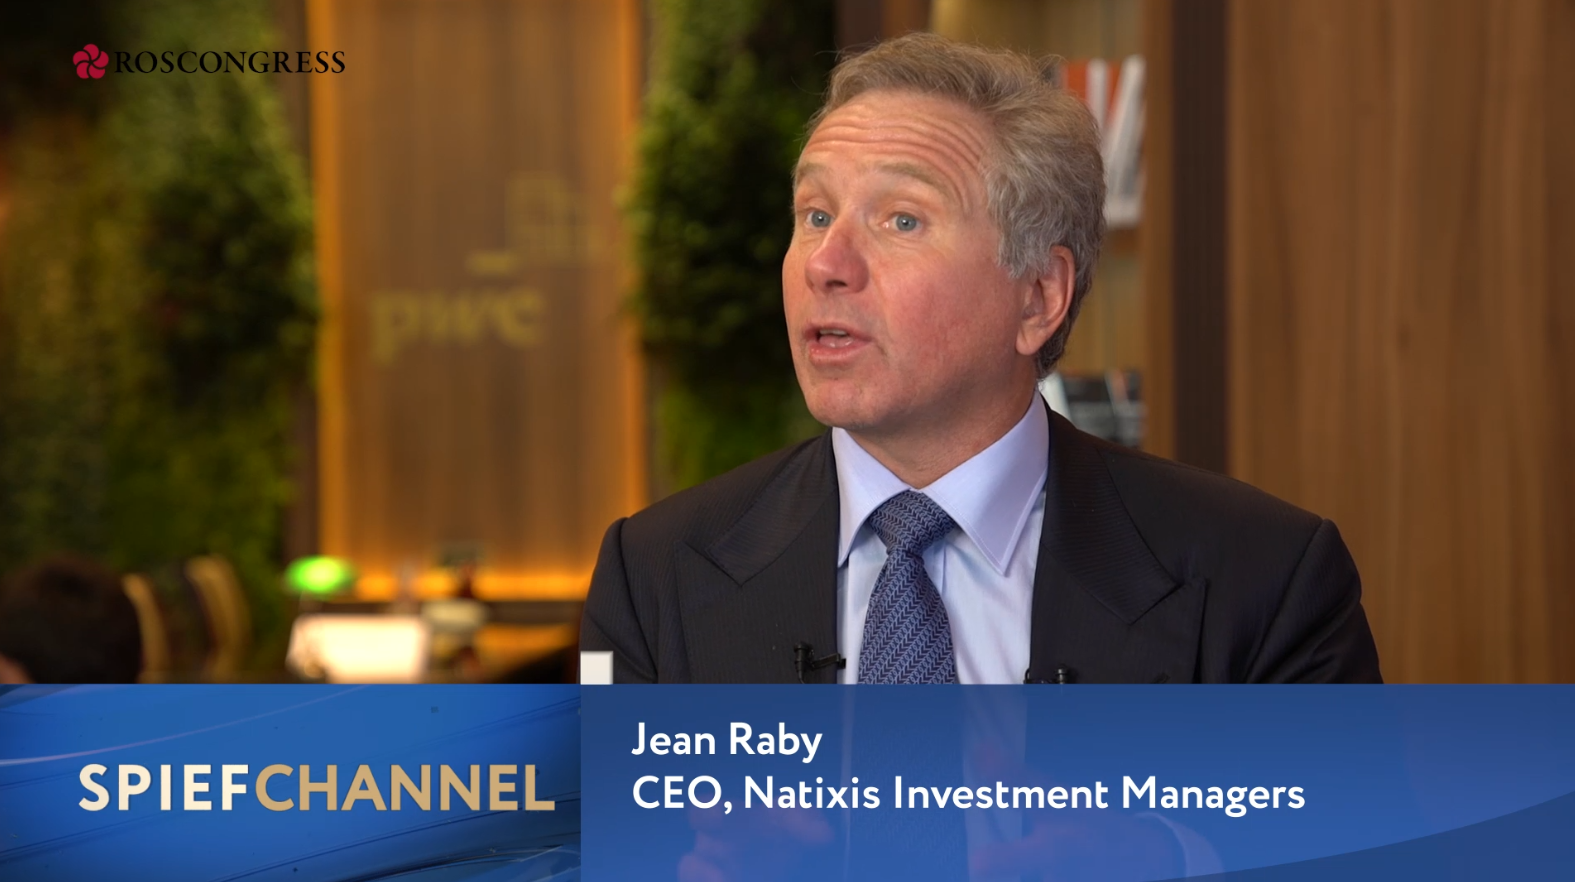 Jean Raby, CEO, Natixis Investment Managers